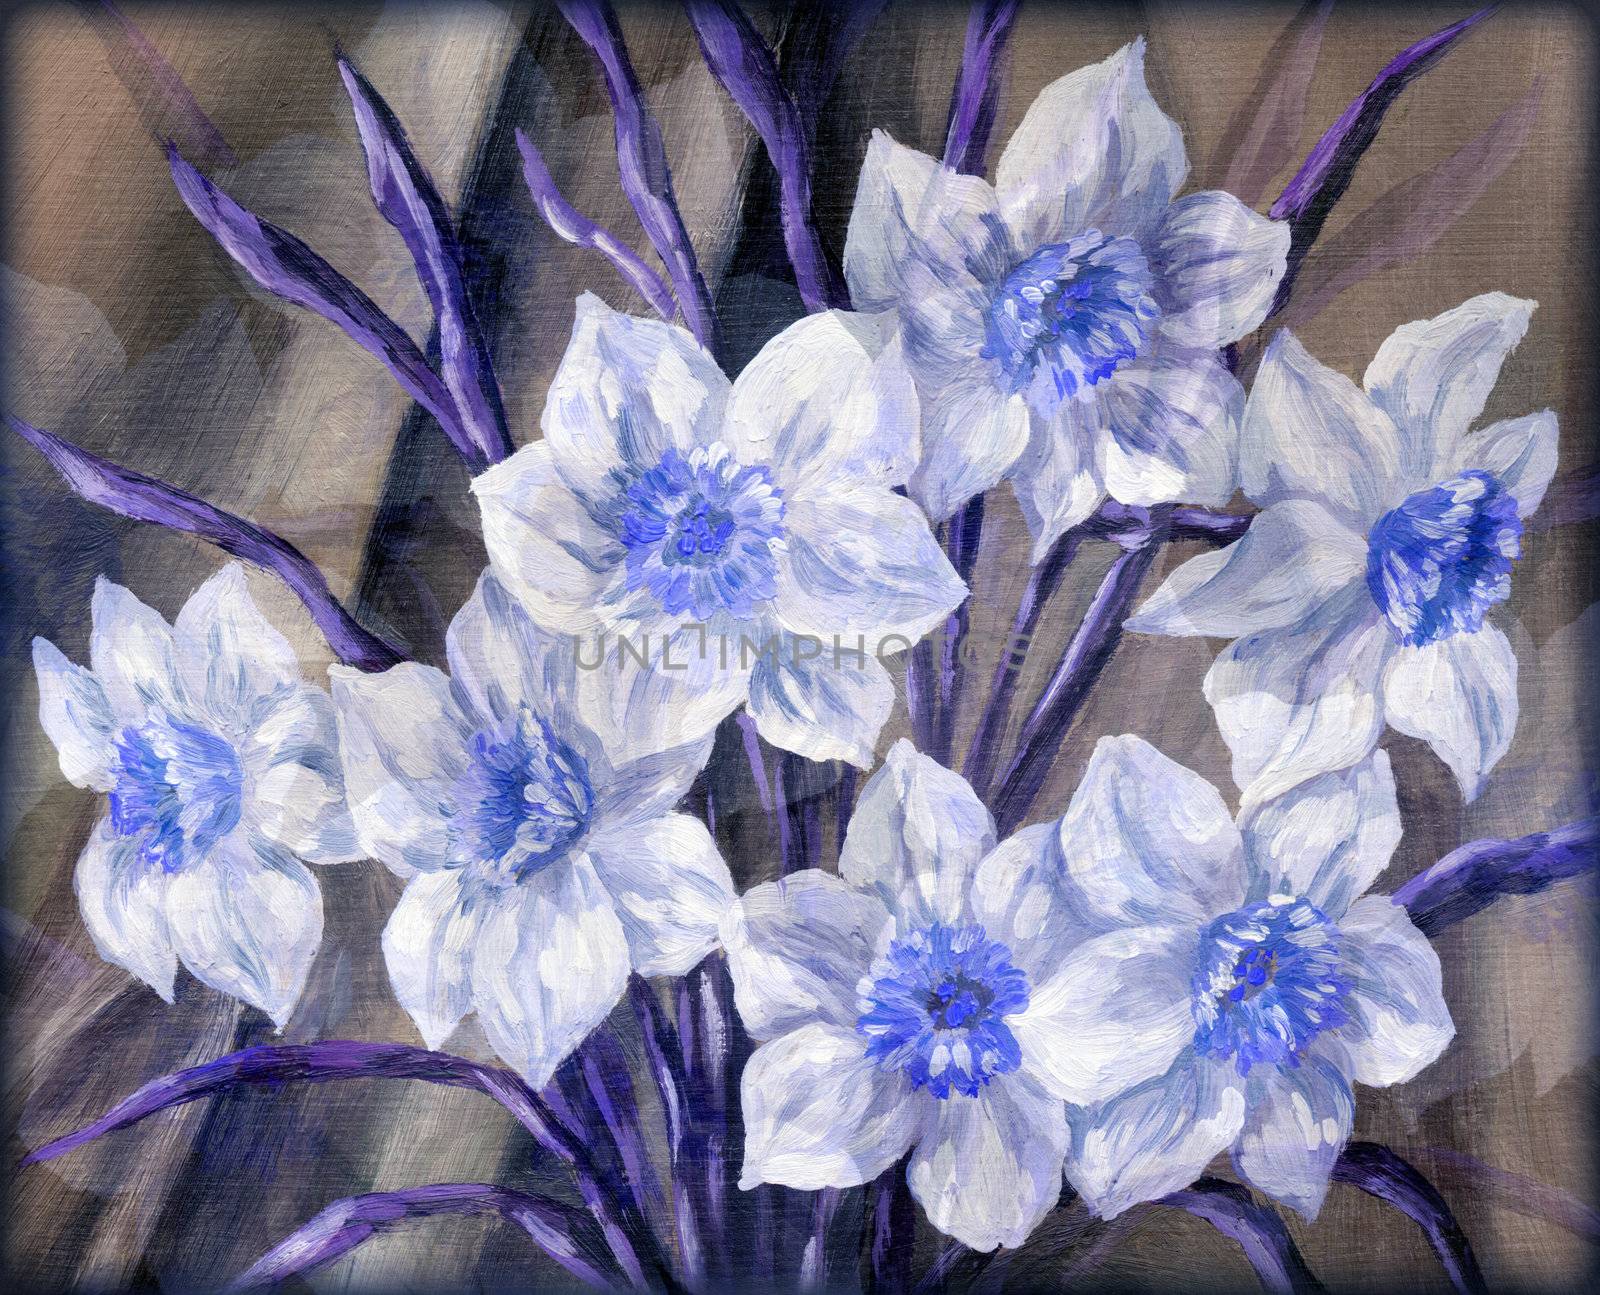 Picture, still-life, blue and white flowers bouquet. Hand draw oil paints on a canvas